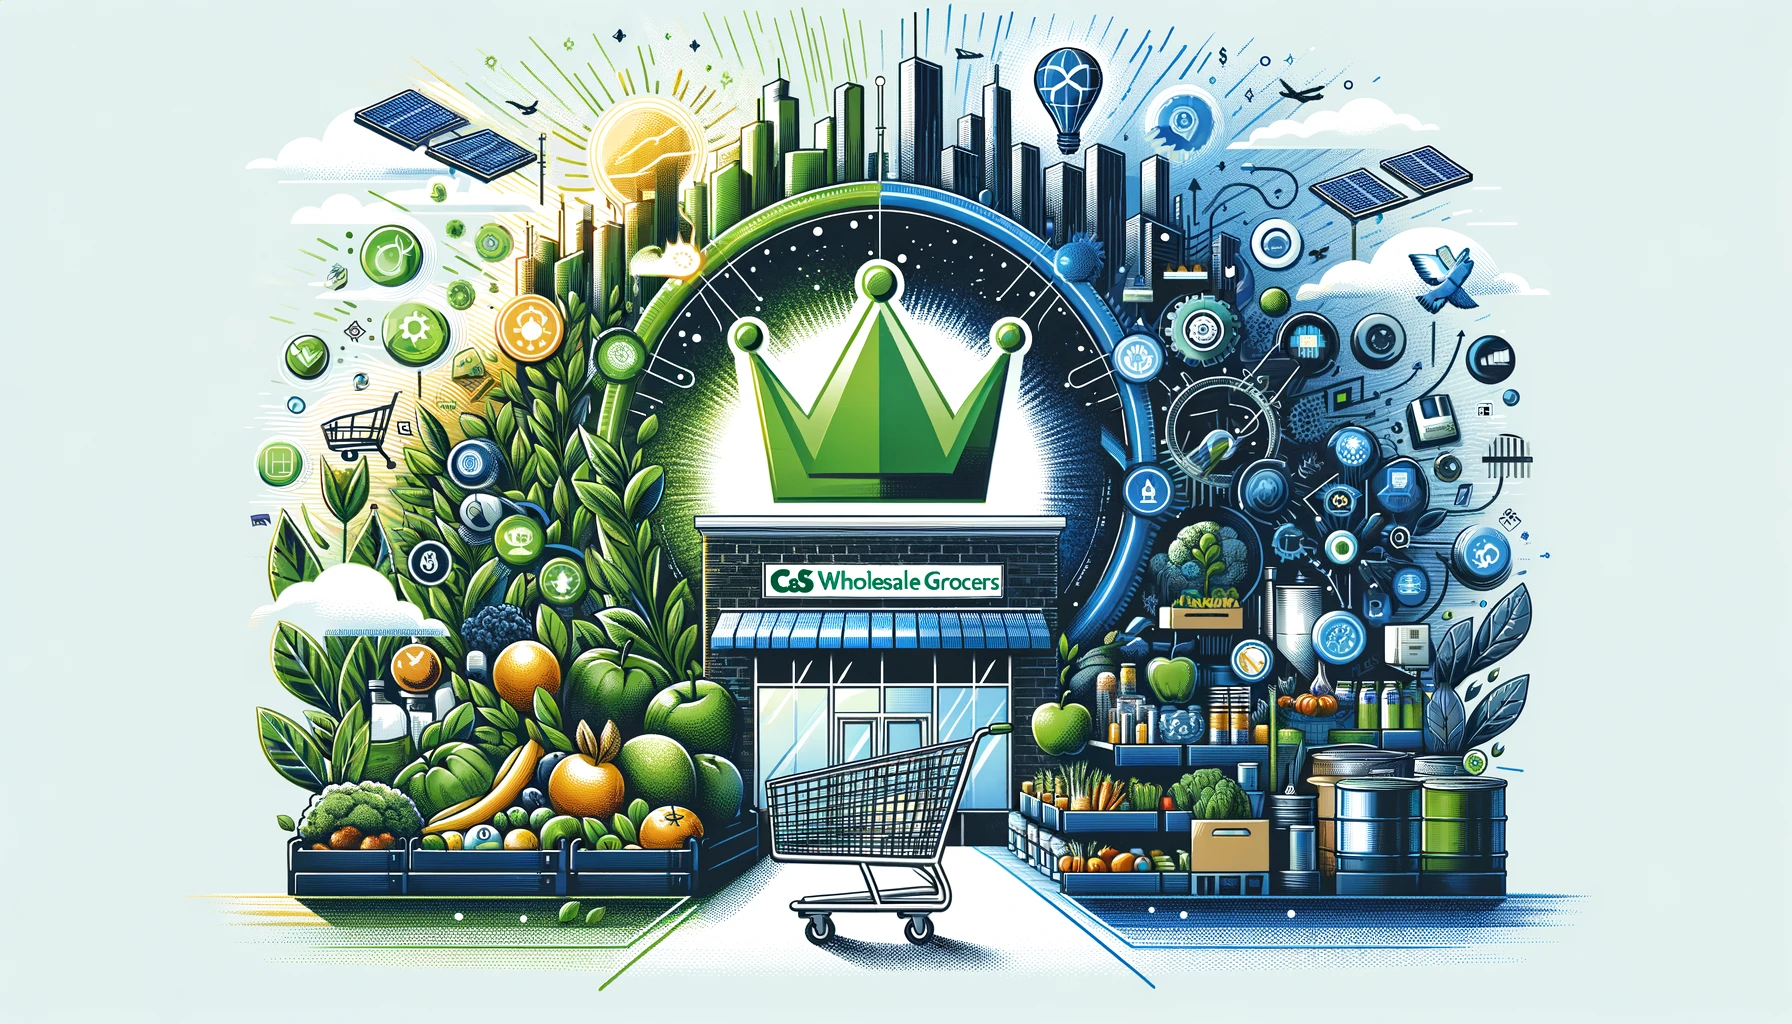 Partnership between Green Crown Energy and C&S Wholesale Grocers for sustainable retail energy management, featuring renewable energy symbols and grocery elements